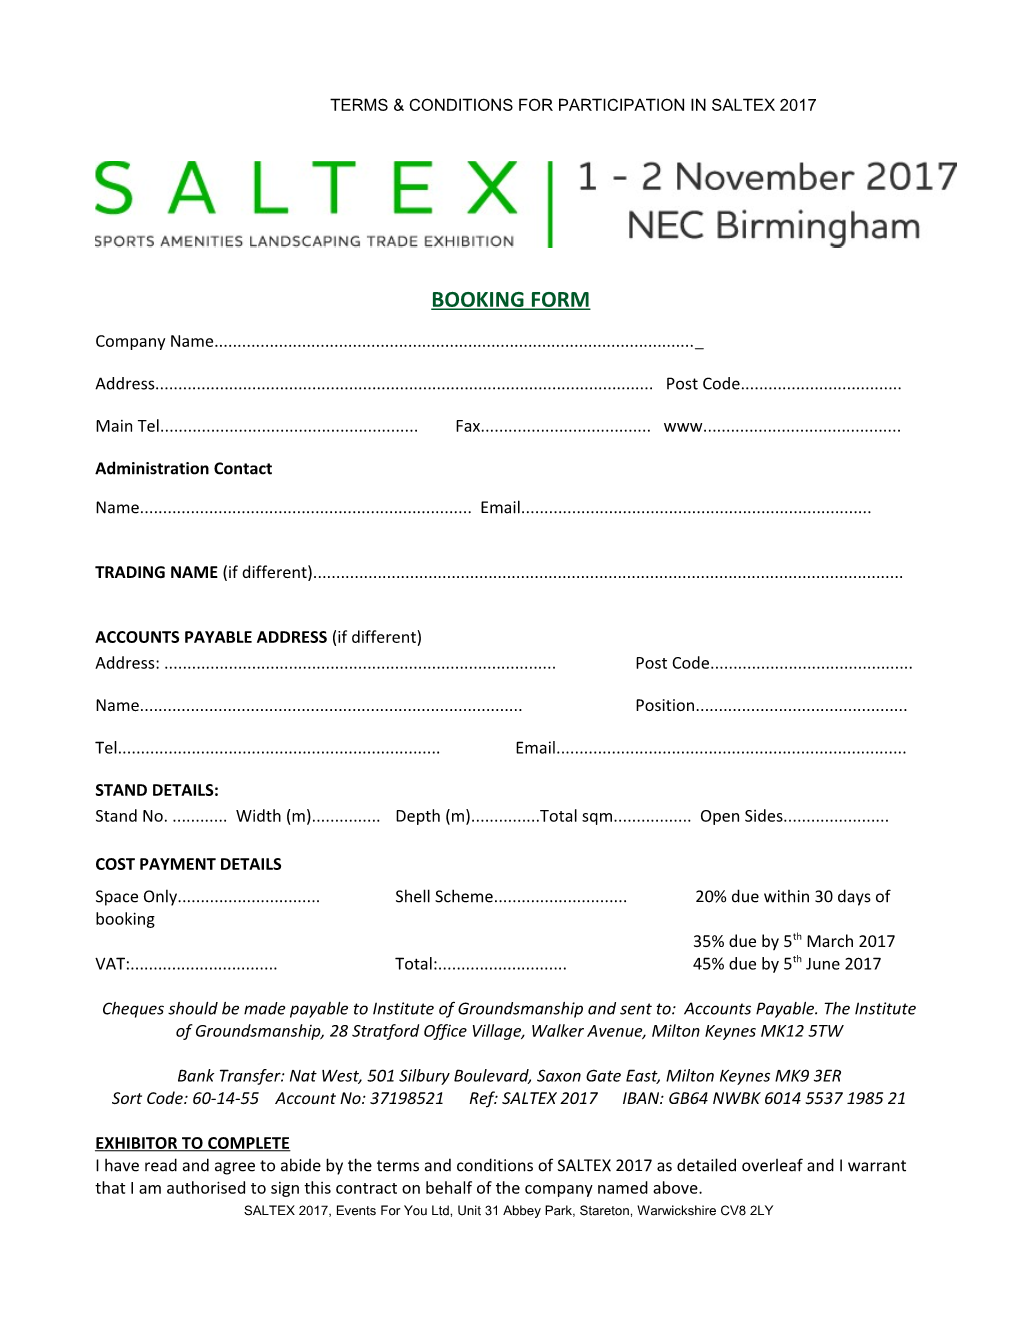 Terms & Conditions for Participation in Saltex 2017